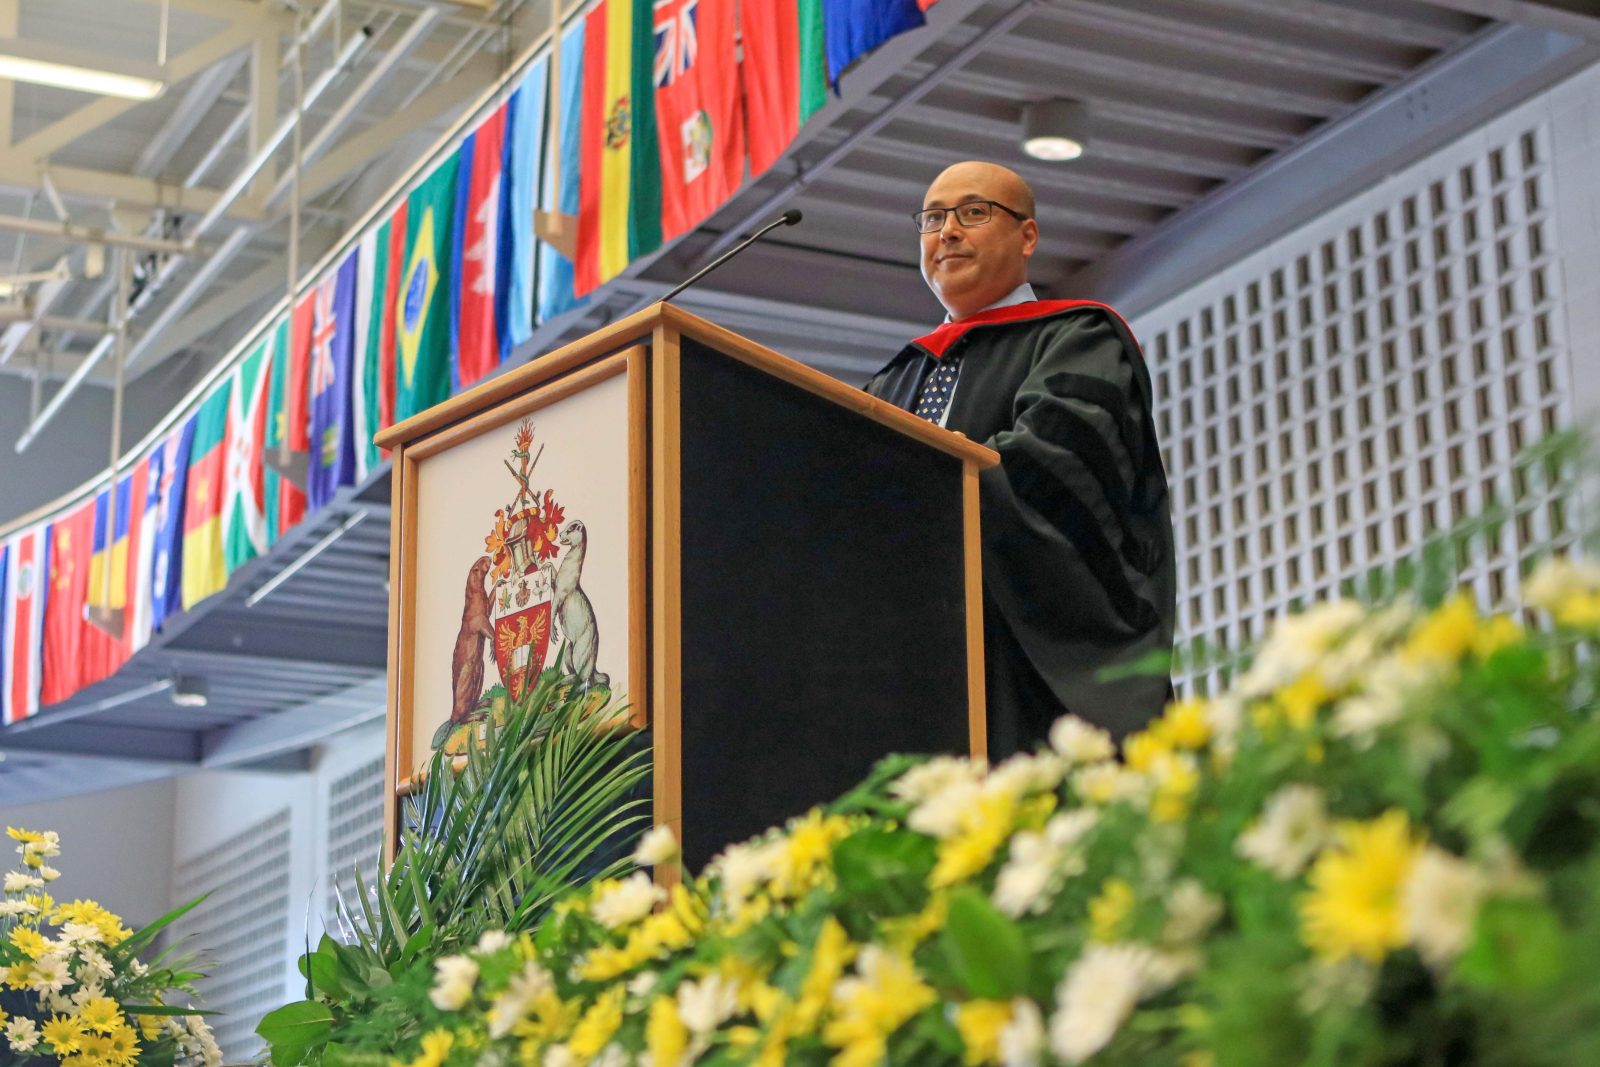 A man stands at a podium in a Convocation gown with yellow flowers in the foreground.